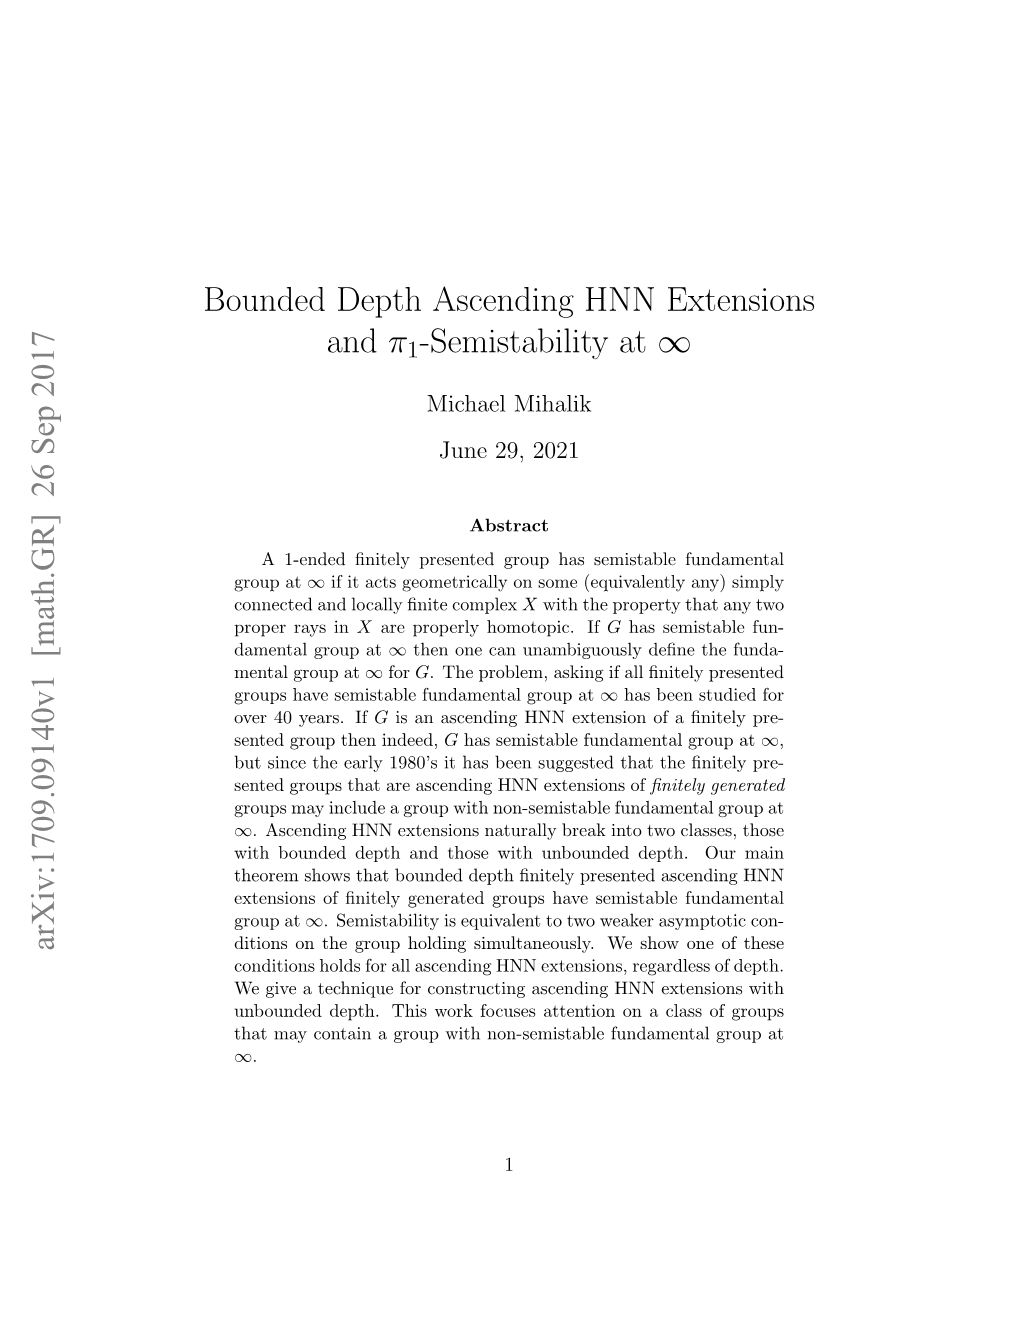 Bounded Depth Ascending HNN Extensions and Π1-Semistability at ∞ Arxiv:1709.09140V1